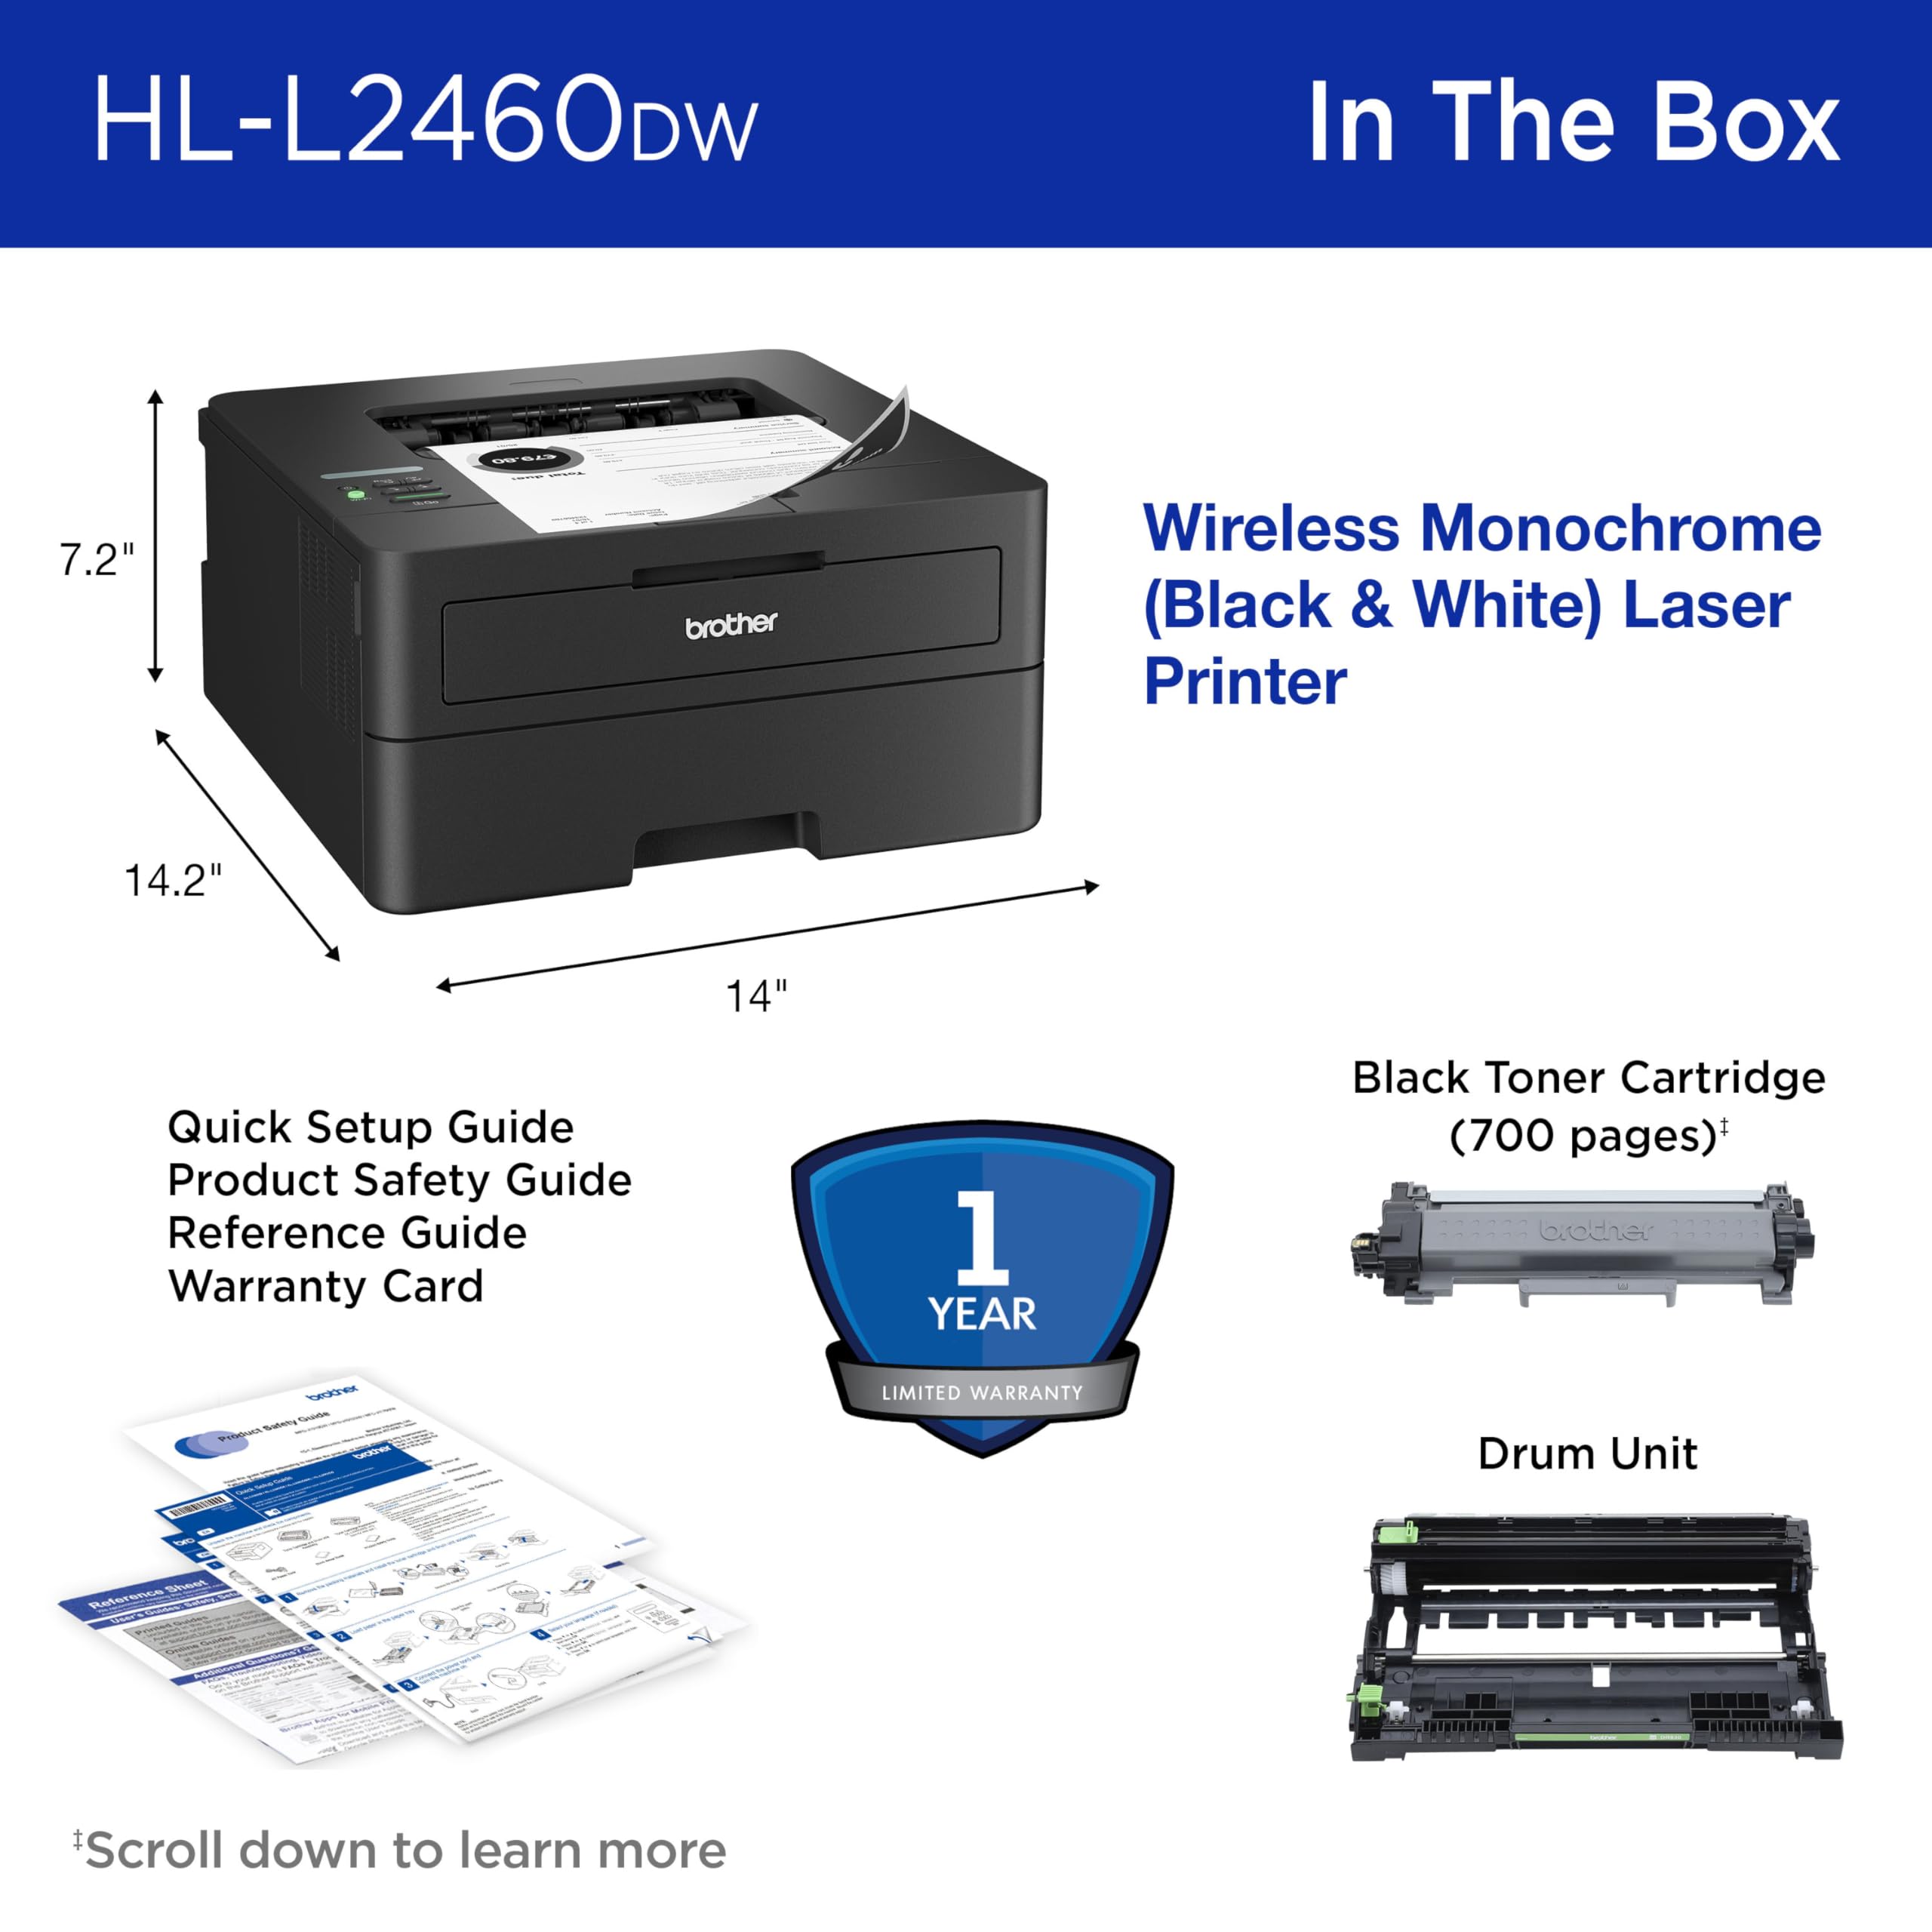 Brother HL-L2460DW Wireless Compact Monochrome Laser Printer with Duplex, Mobile Printing, Black & White Output | Includes Refresh Subscription Trial(1), Amazon Dash Replenishment Ready